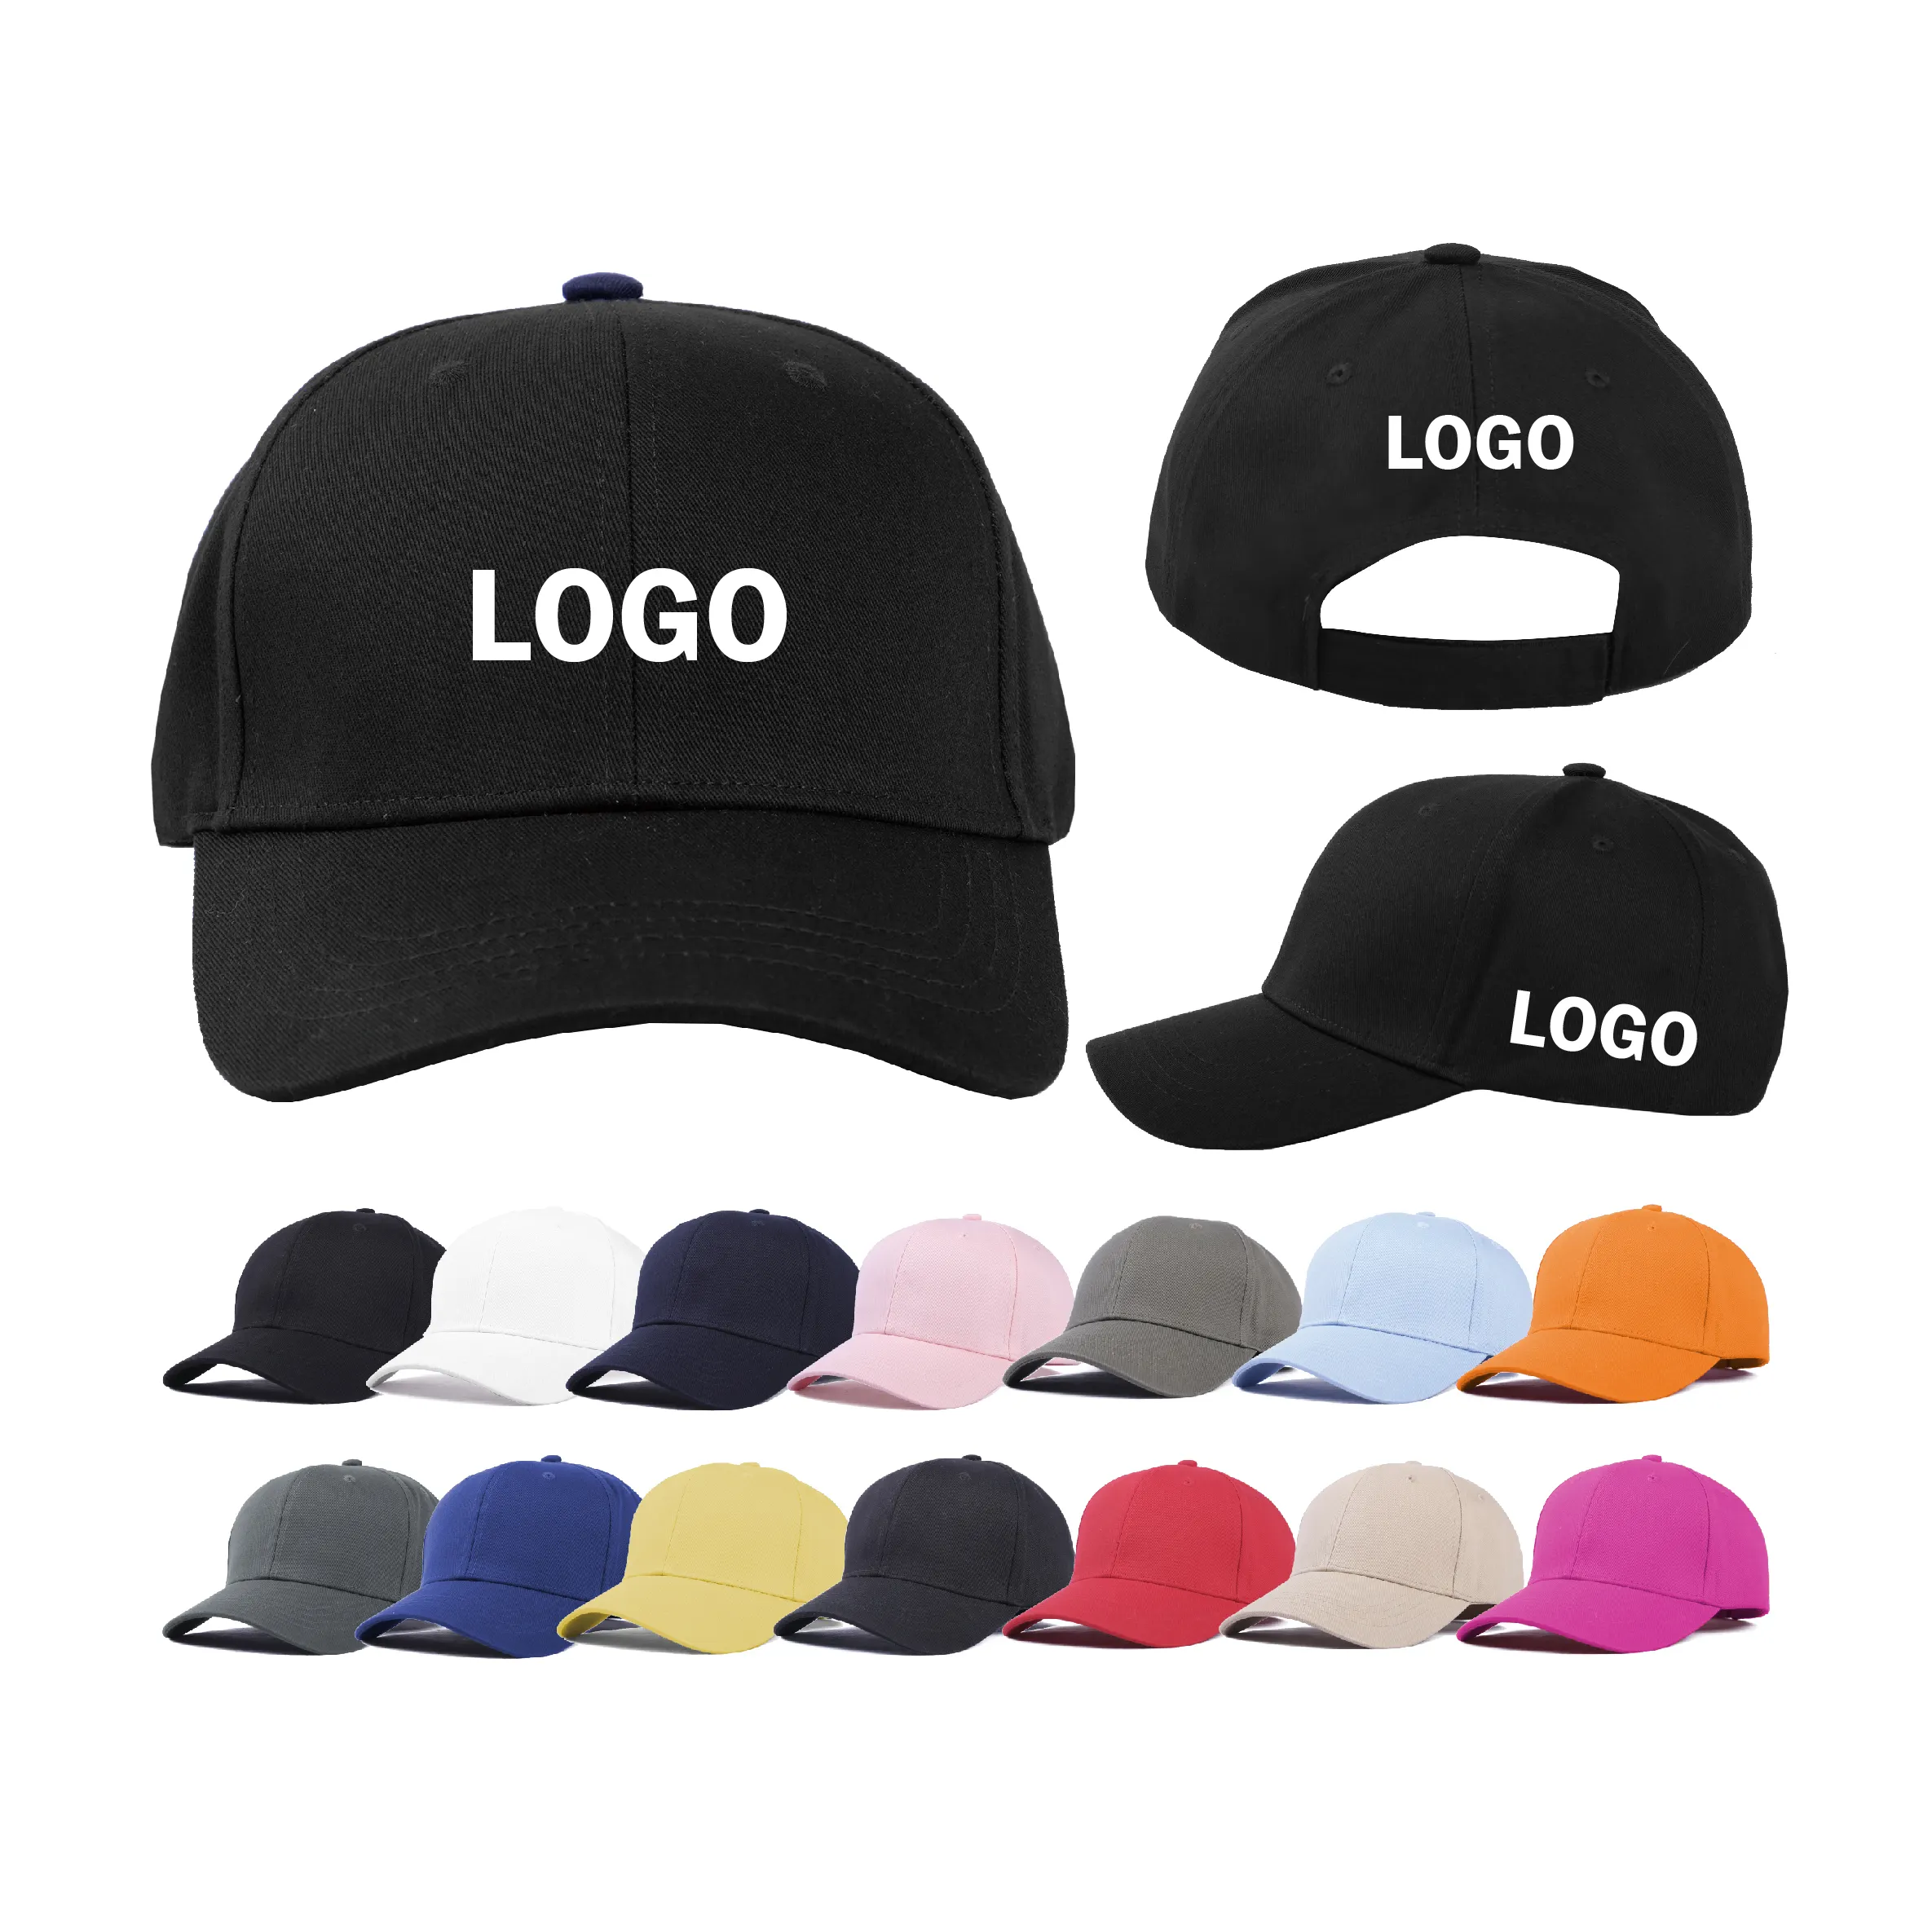 Wholesale Unisex Adjustable Cotton Casquette Customized 6 Panel Fitted Plain Baseball Cap Hats with Custom embroidery logo